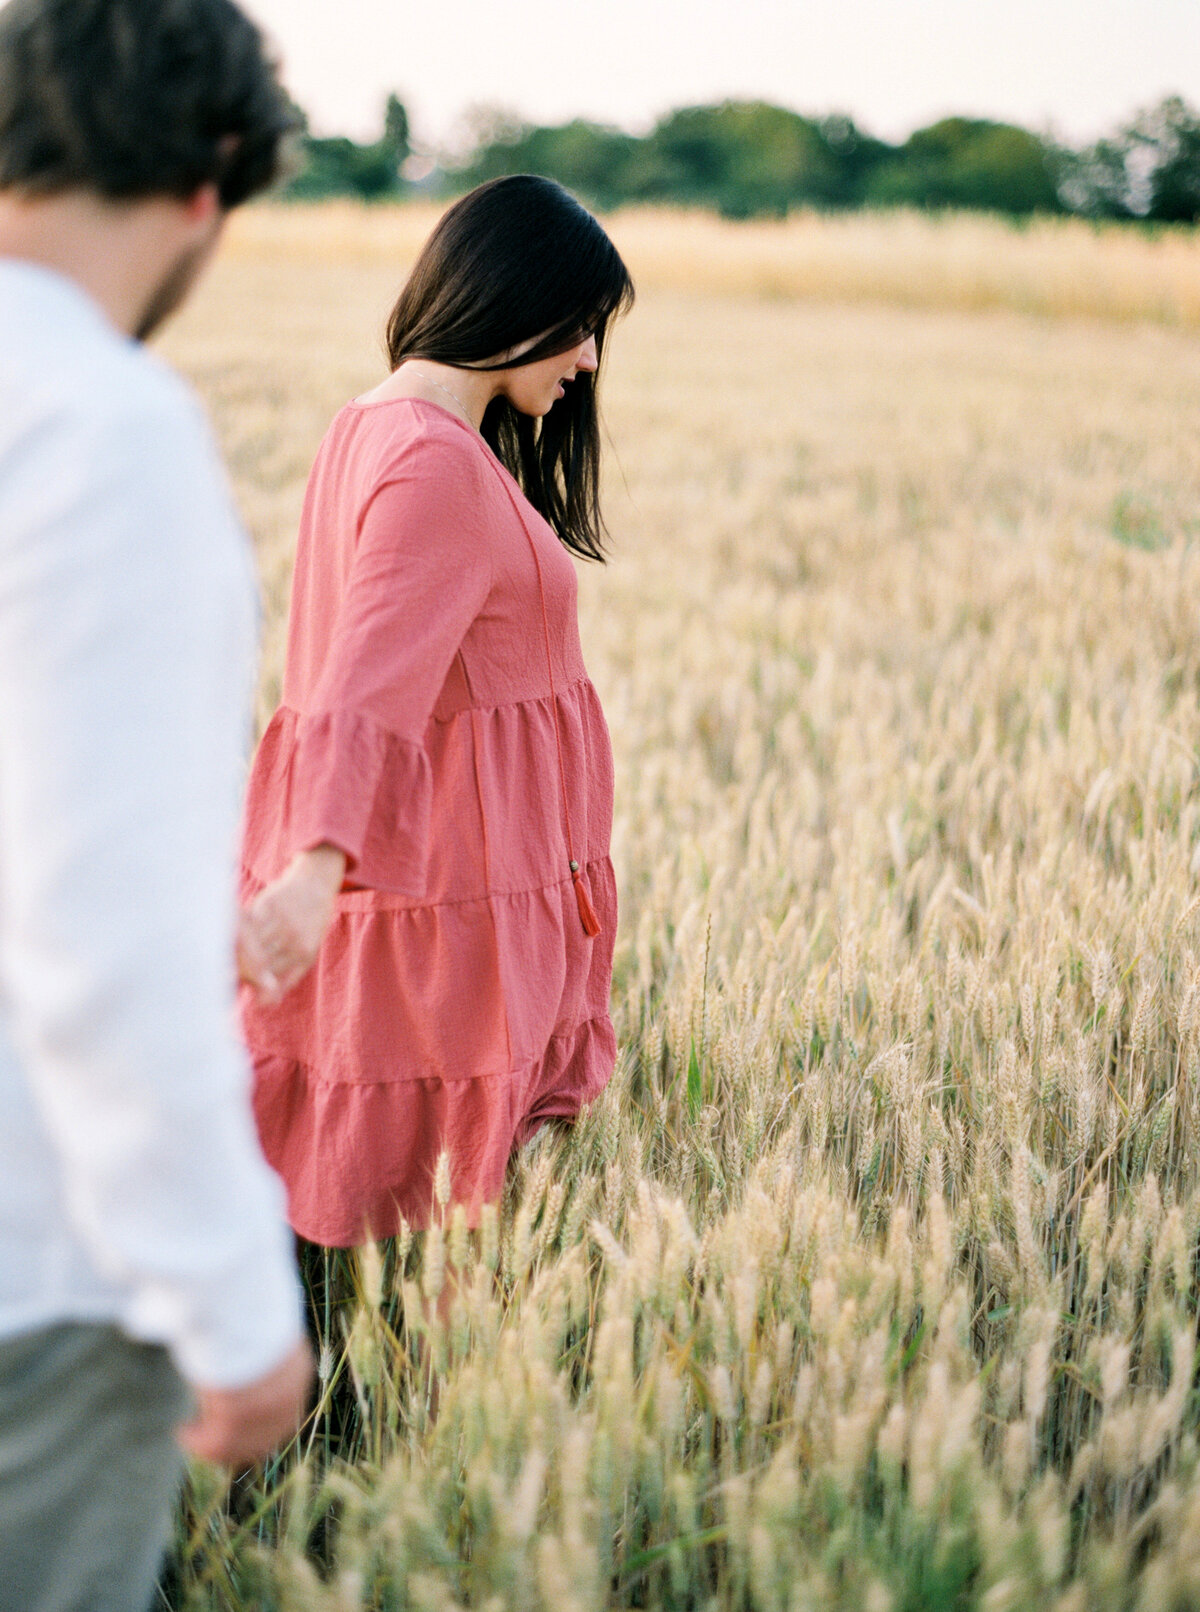 Family photography session outdoors in Cesena, Emilia-Romagna, Italy - 21